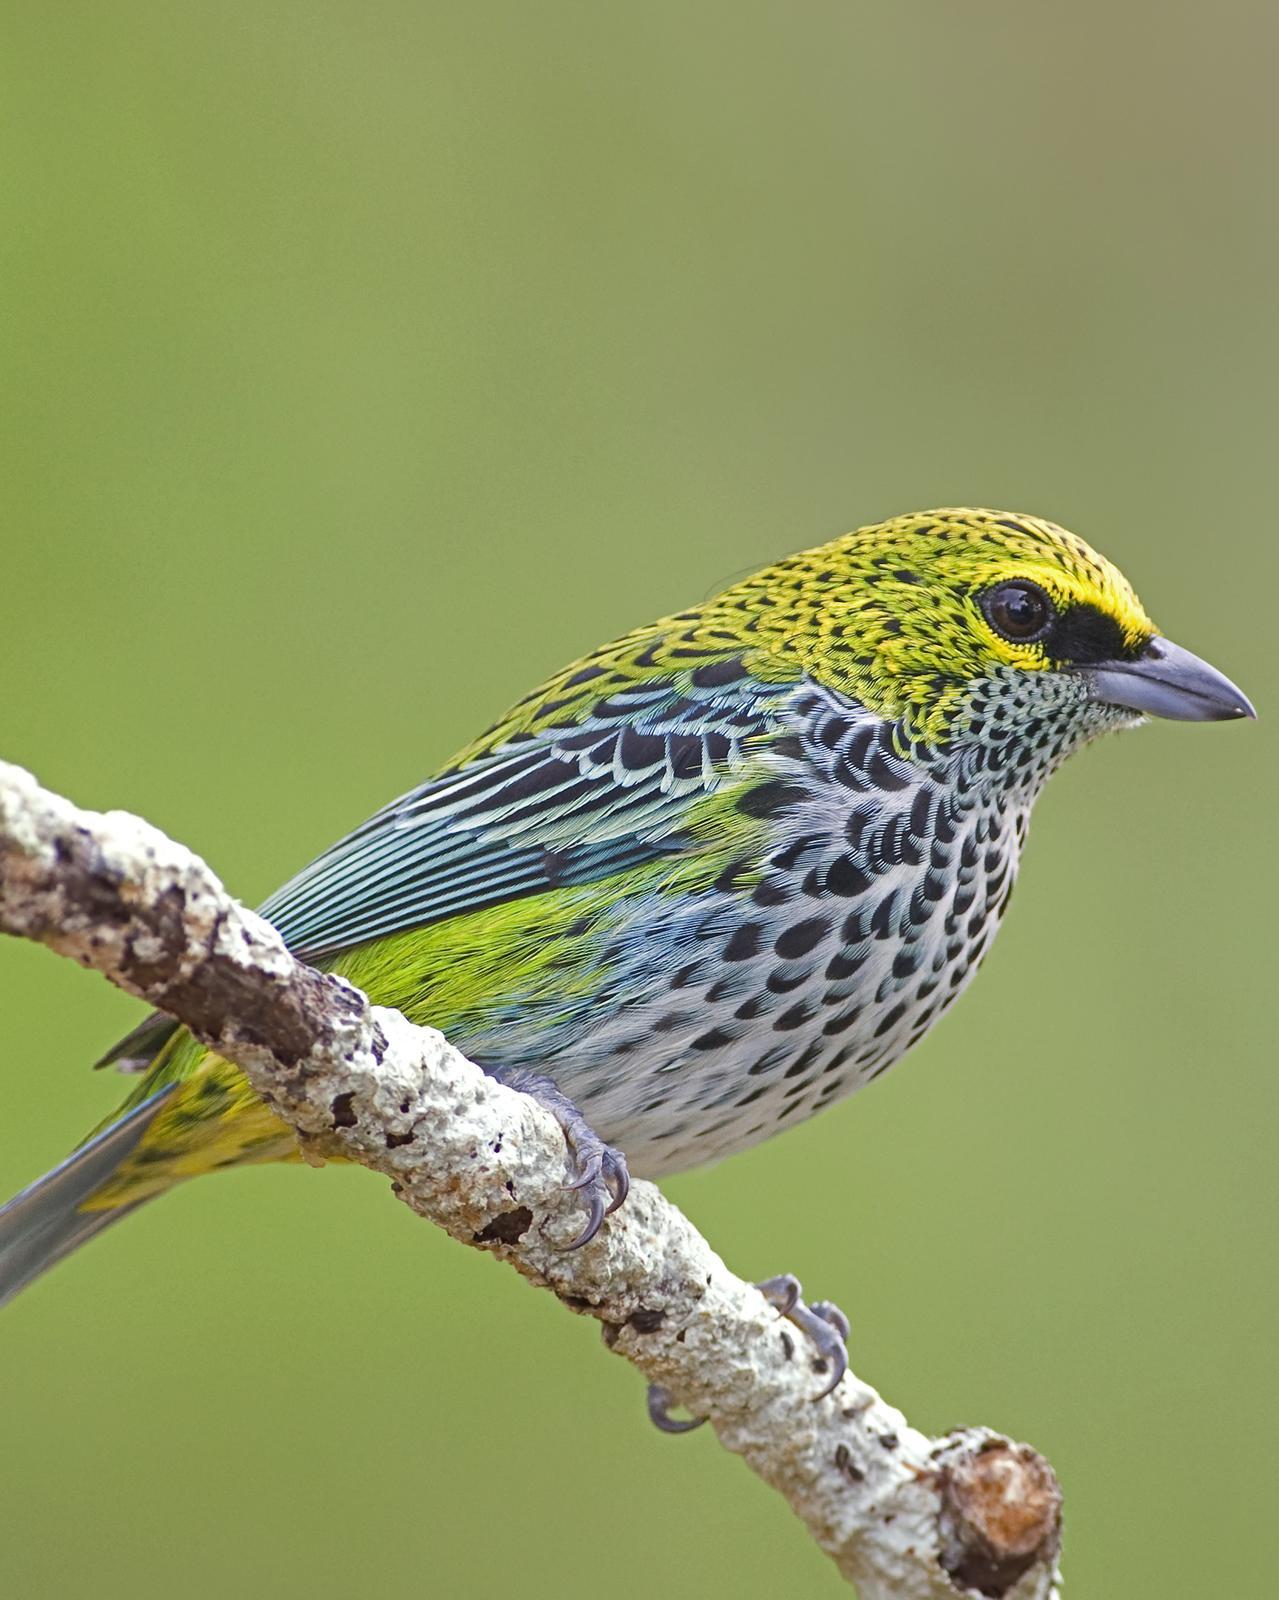 Speckled Tanager Photo by Alex Vargas